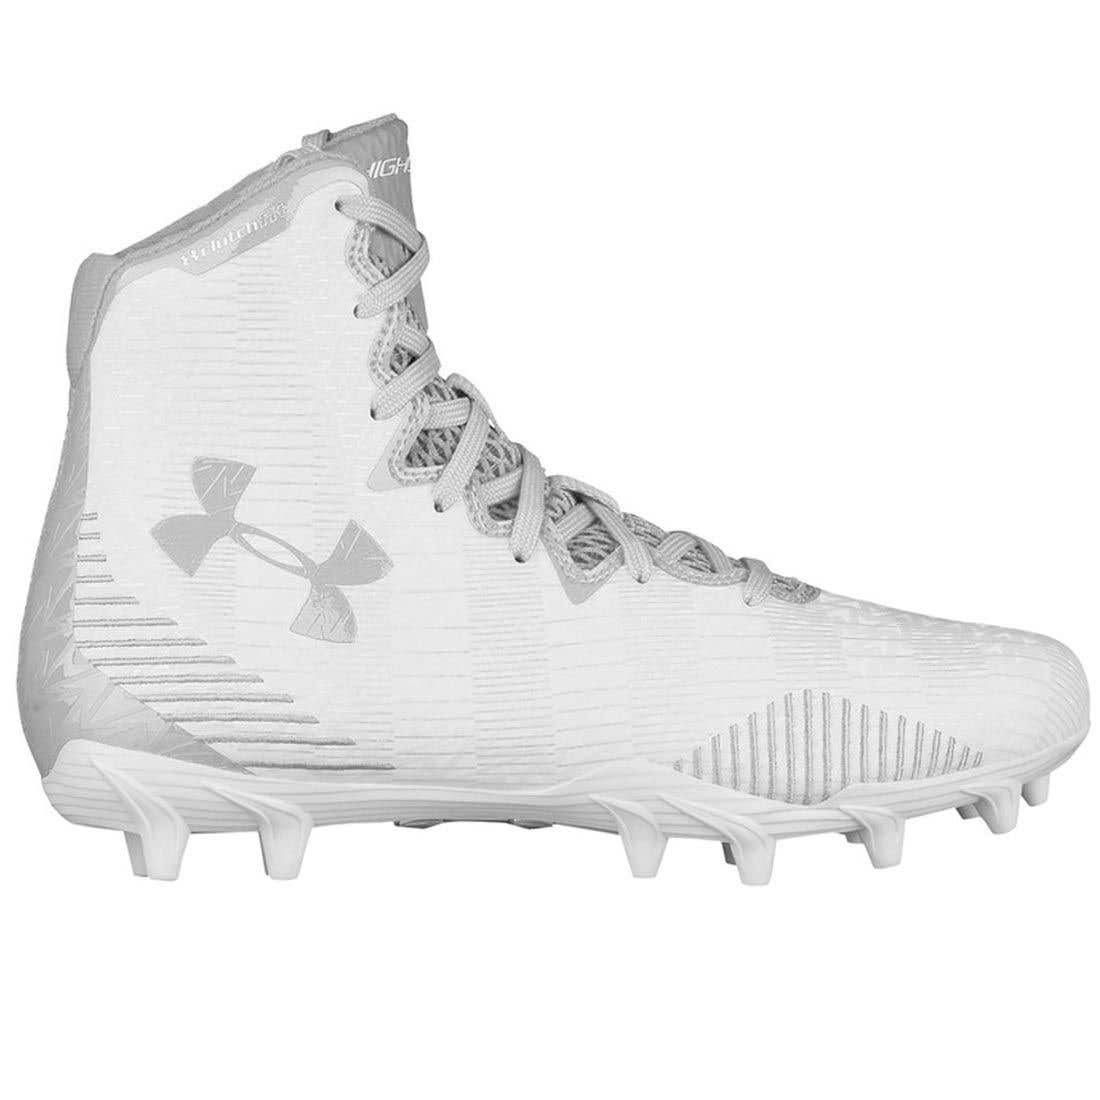 Under Armour Highlight Molded Women's Lacrosse Cleats White 1297347-104 Size 5.5 